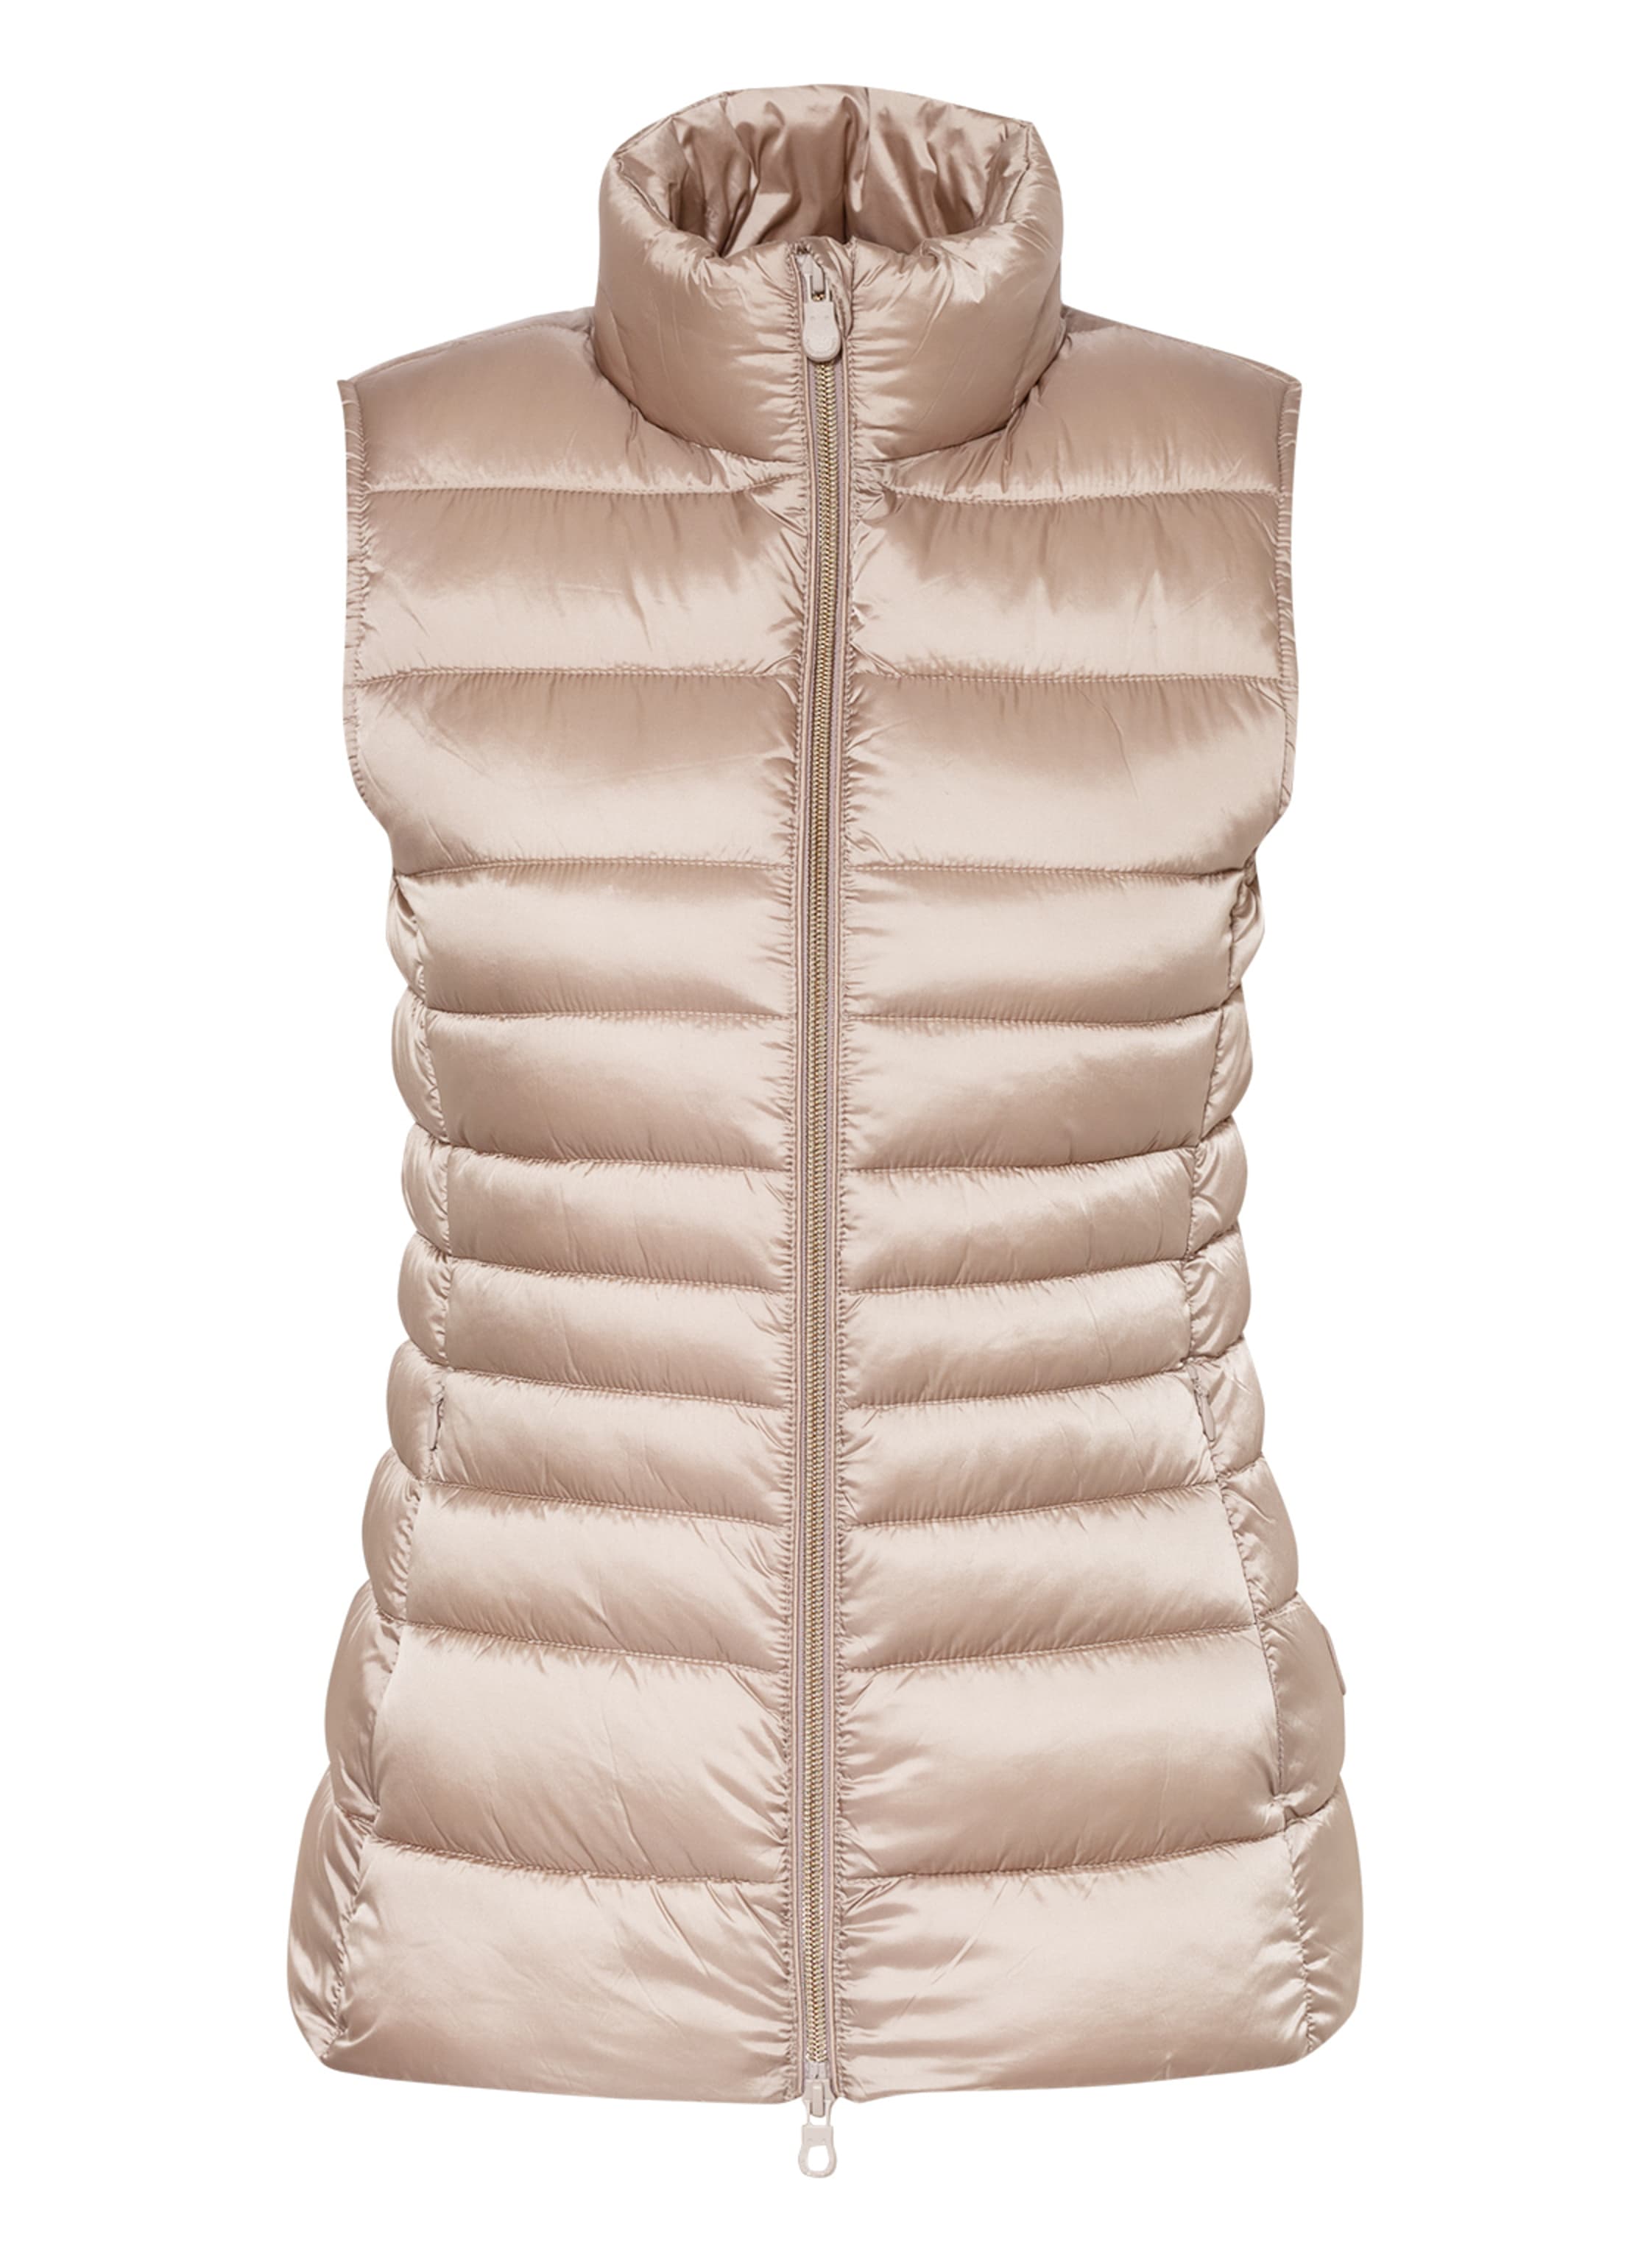 SAVE DUCK LYNN taupe Quilted IRIS THE in vest